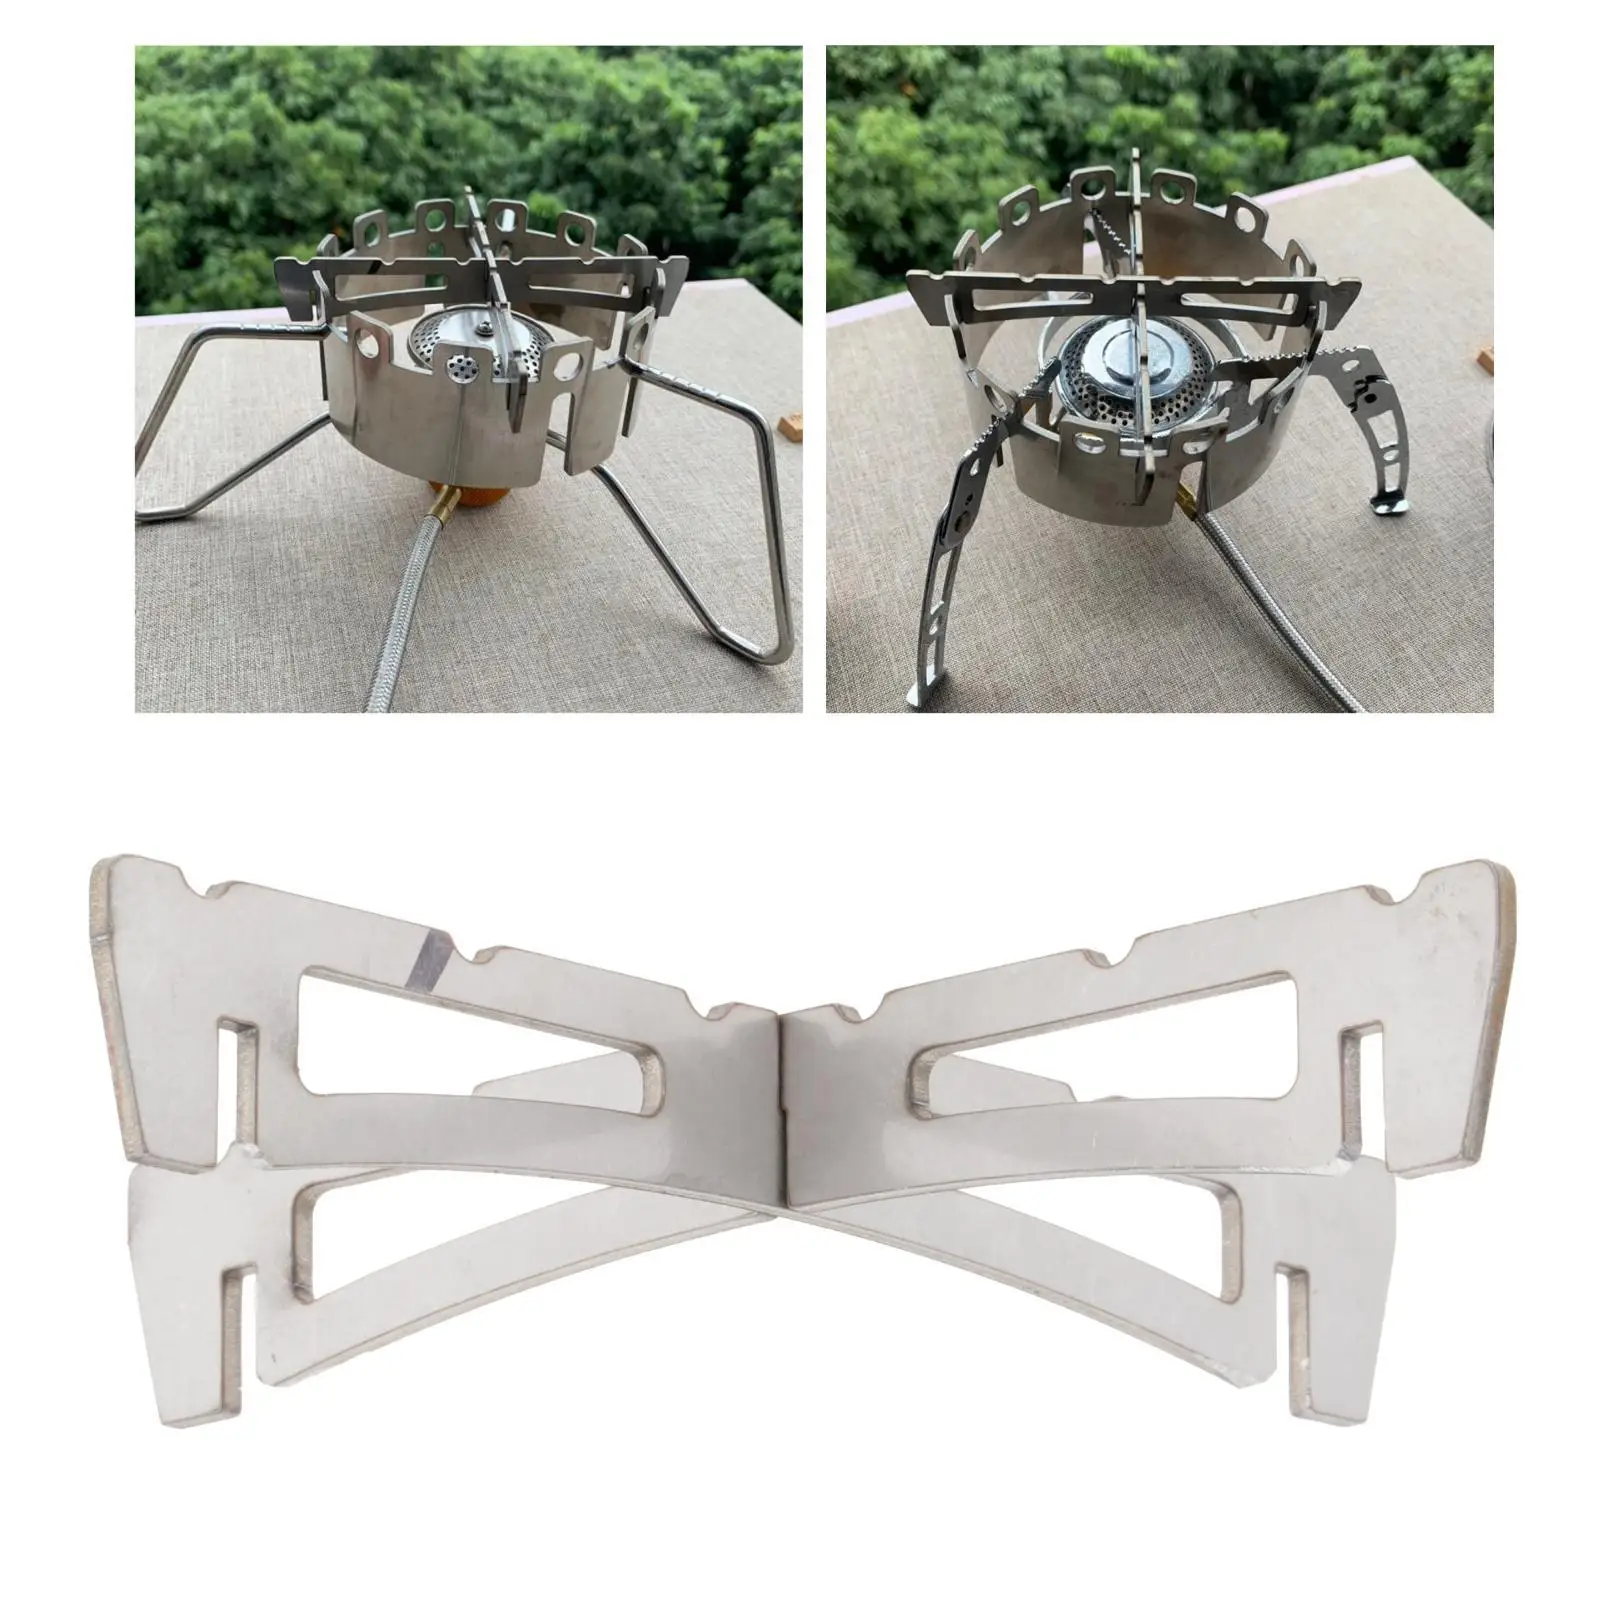  Stove  Stand Rack Camping Stainless Steel Ultralight Spirit 304